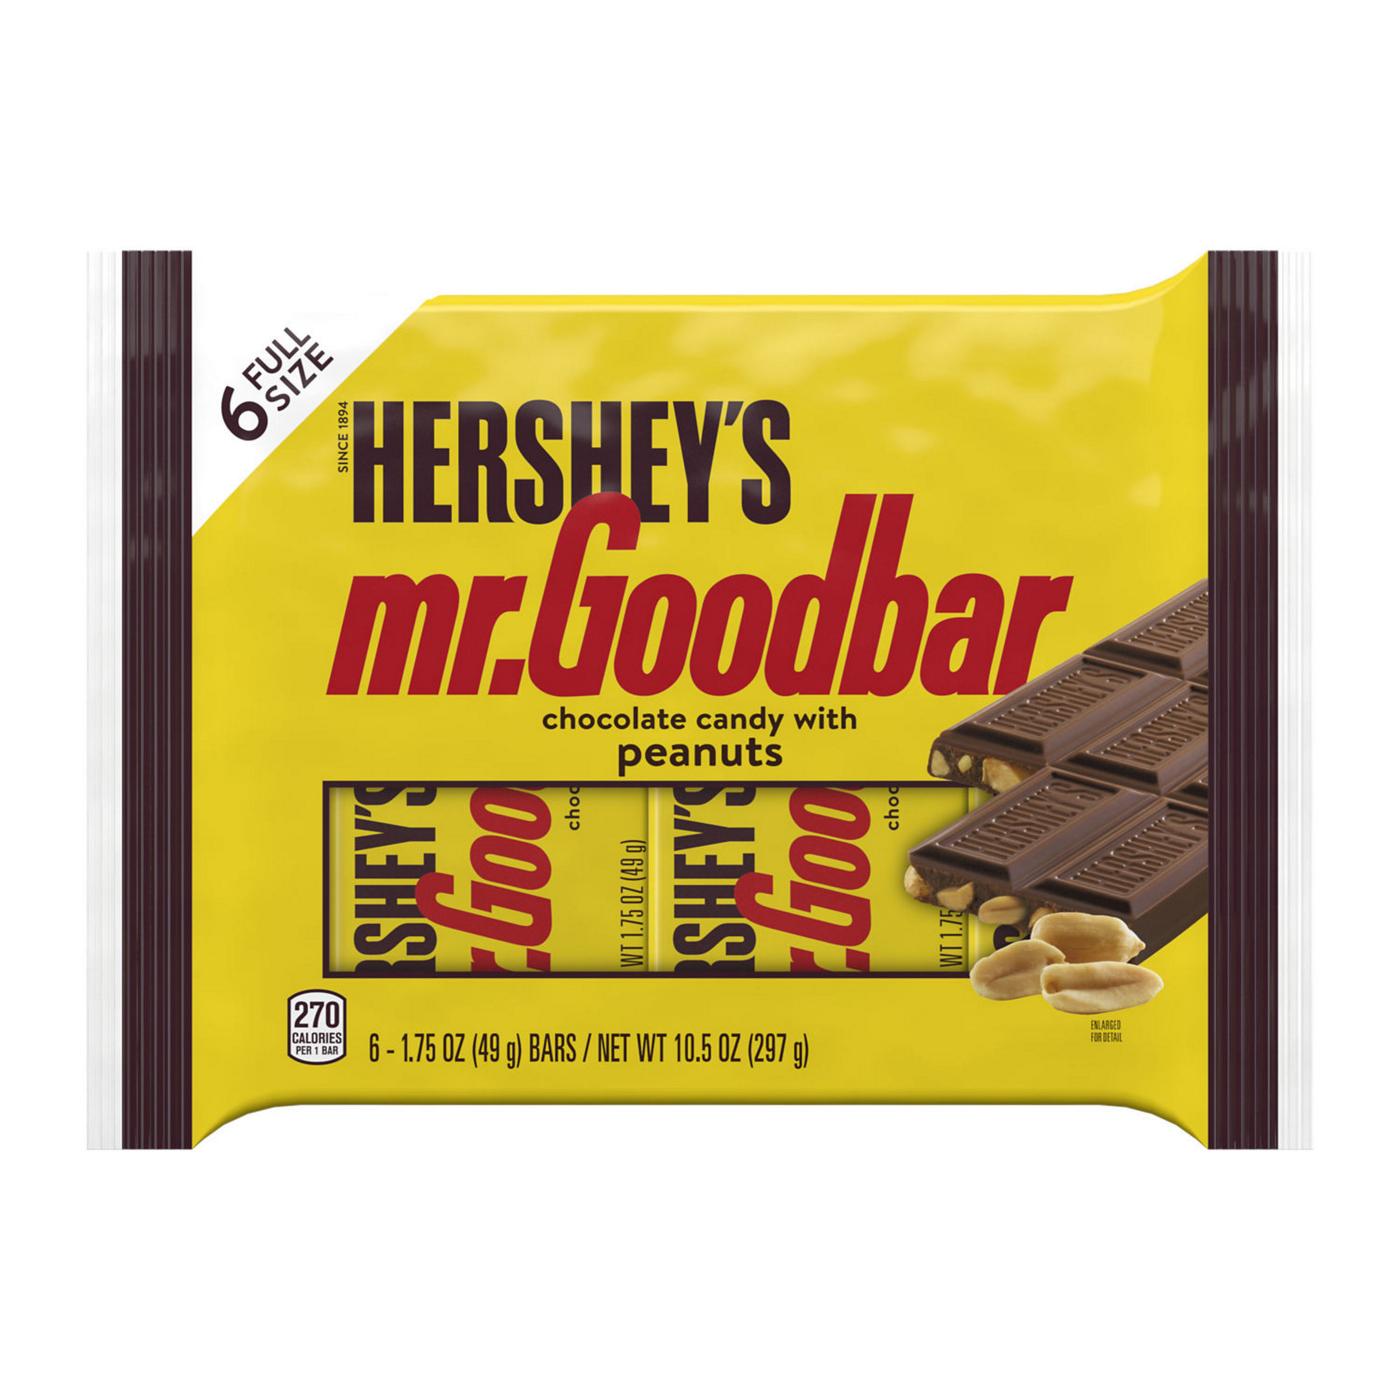 Hershey's mr. Goodbar Full Size Candy Bars; image 1 of 7